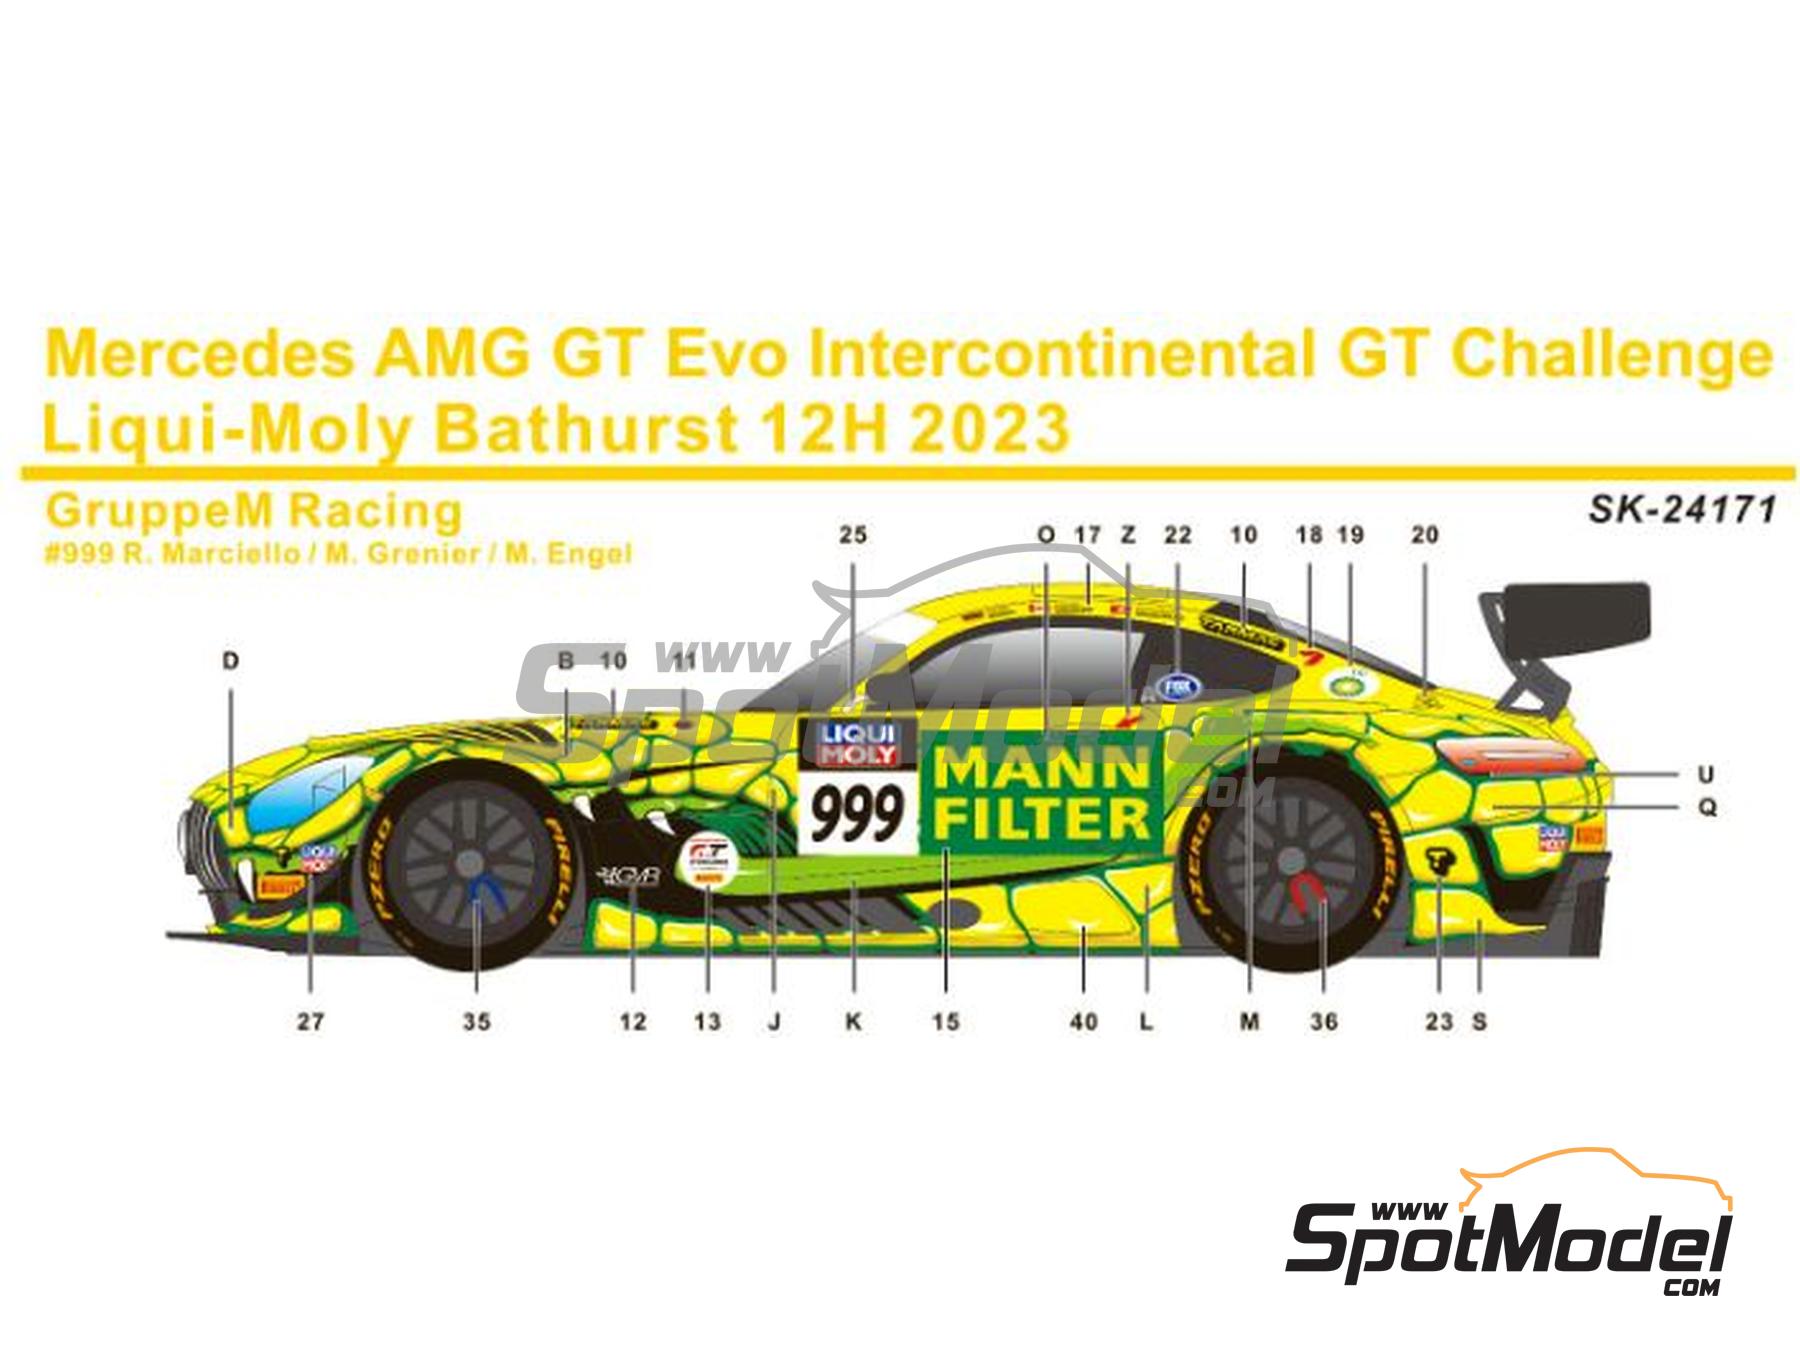 Mercedes AMG GT3 Evo GruppeM Racing Team sponsored by Mann Filter - 12  hours Bathurst 2023. Marking / livery in 1/24 scale manufactured by SK  Decals (